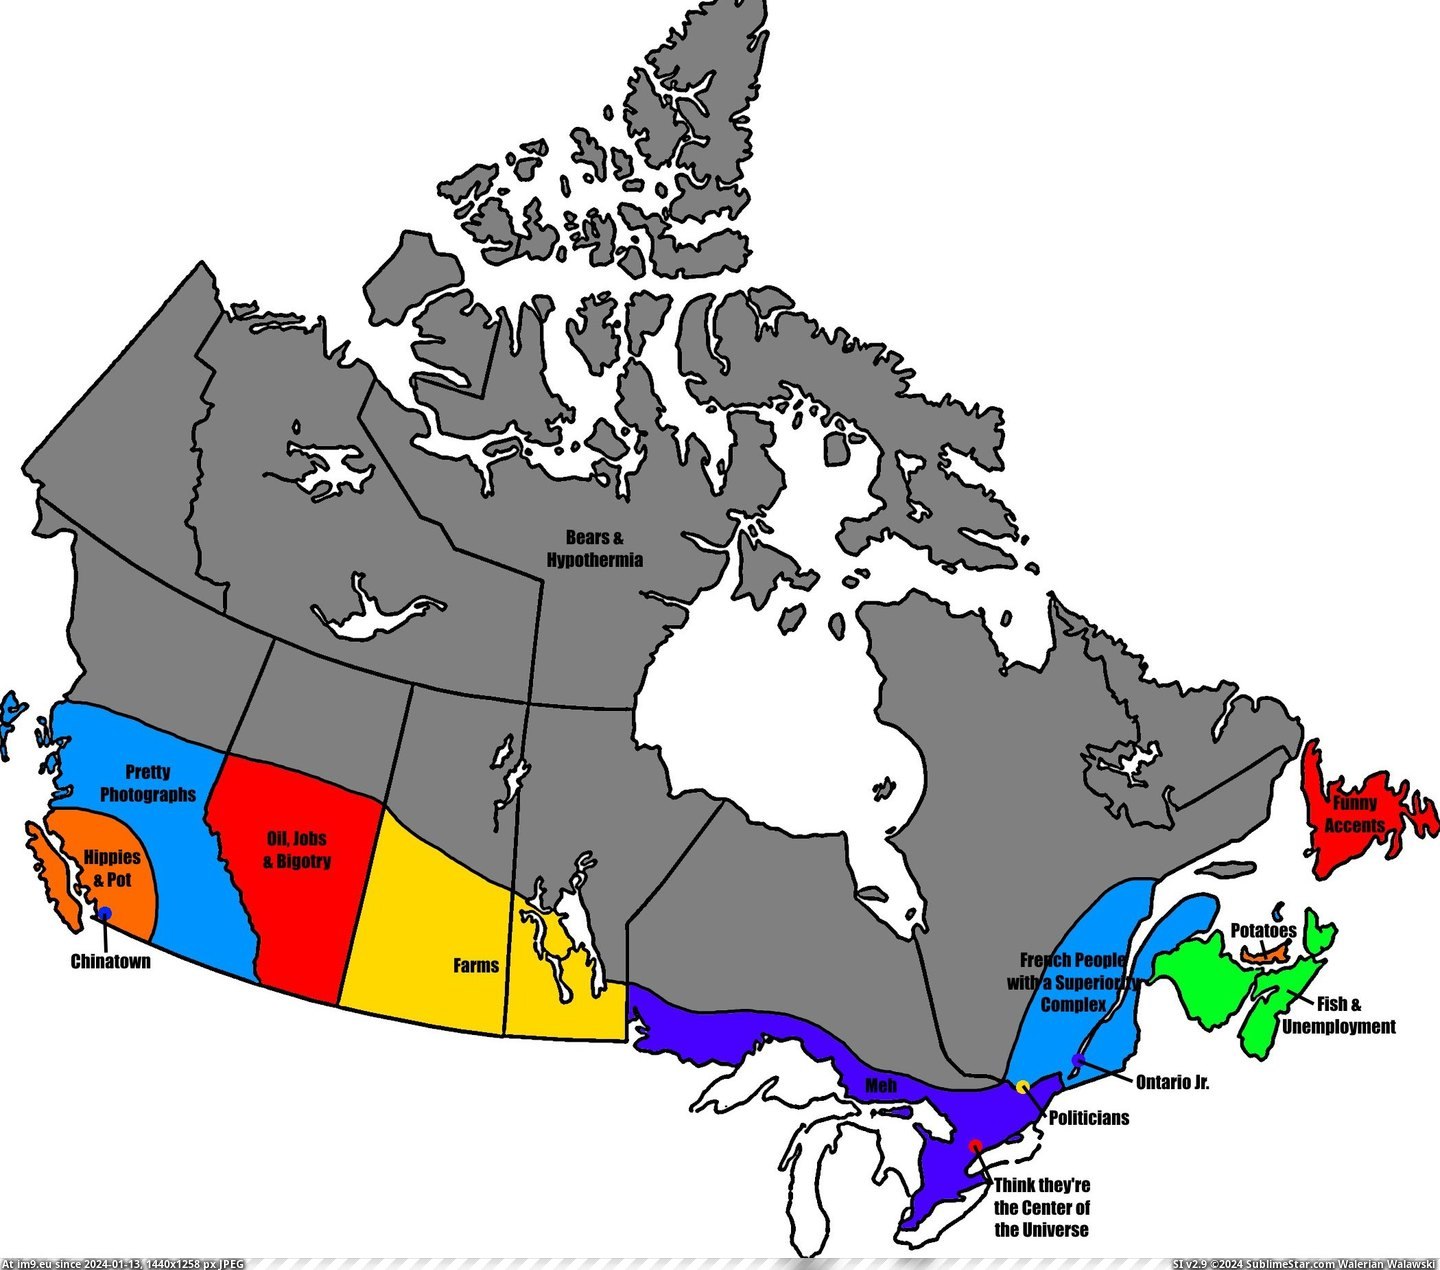 #Thought #Canada #France #Stereotypes #Stereotype #Popular #Maps #Nova [Mapporn]  Since the UK and France stereotype maps were so popular I thought I'd do my home. Stereotypes of Canada from a Nova S Pic. (Изображение из альбом My r/MAPS favs))